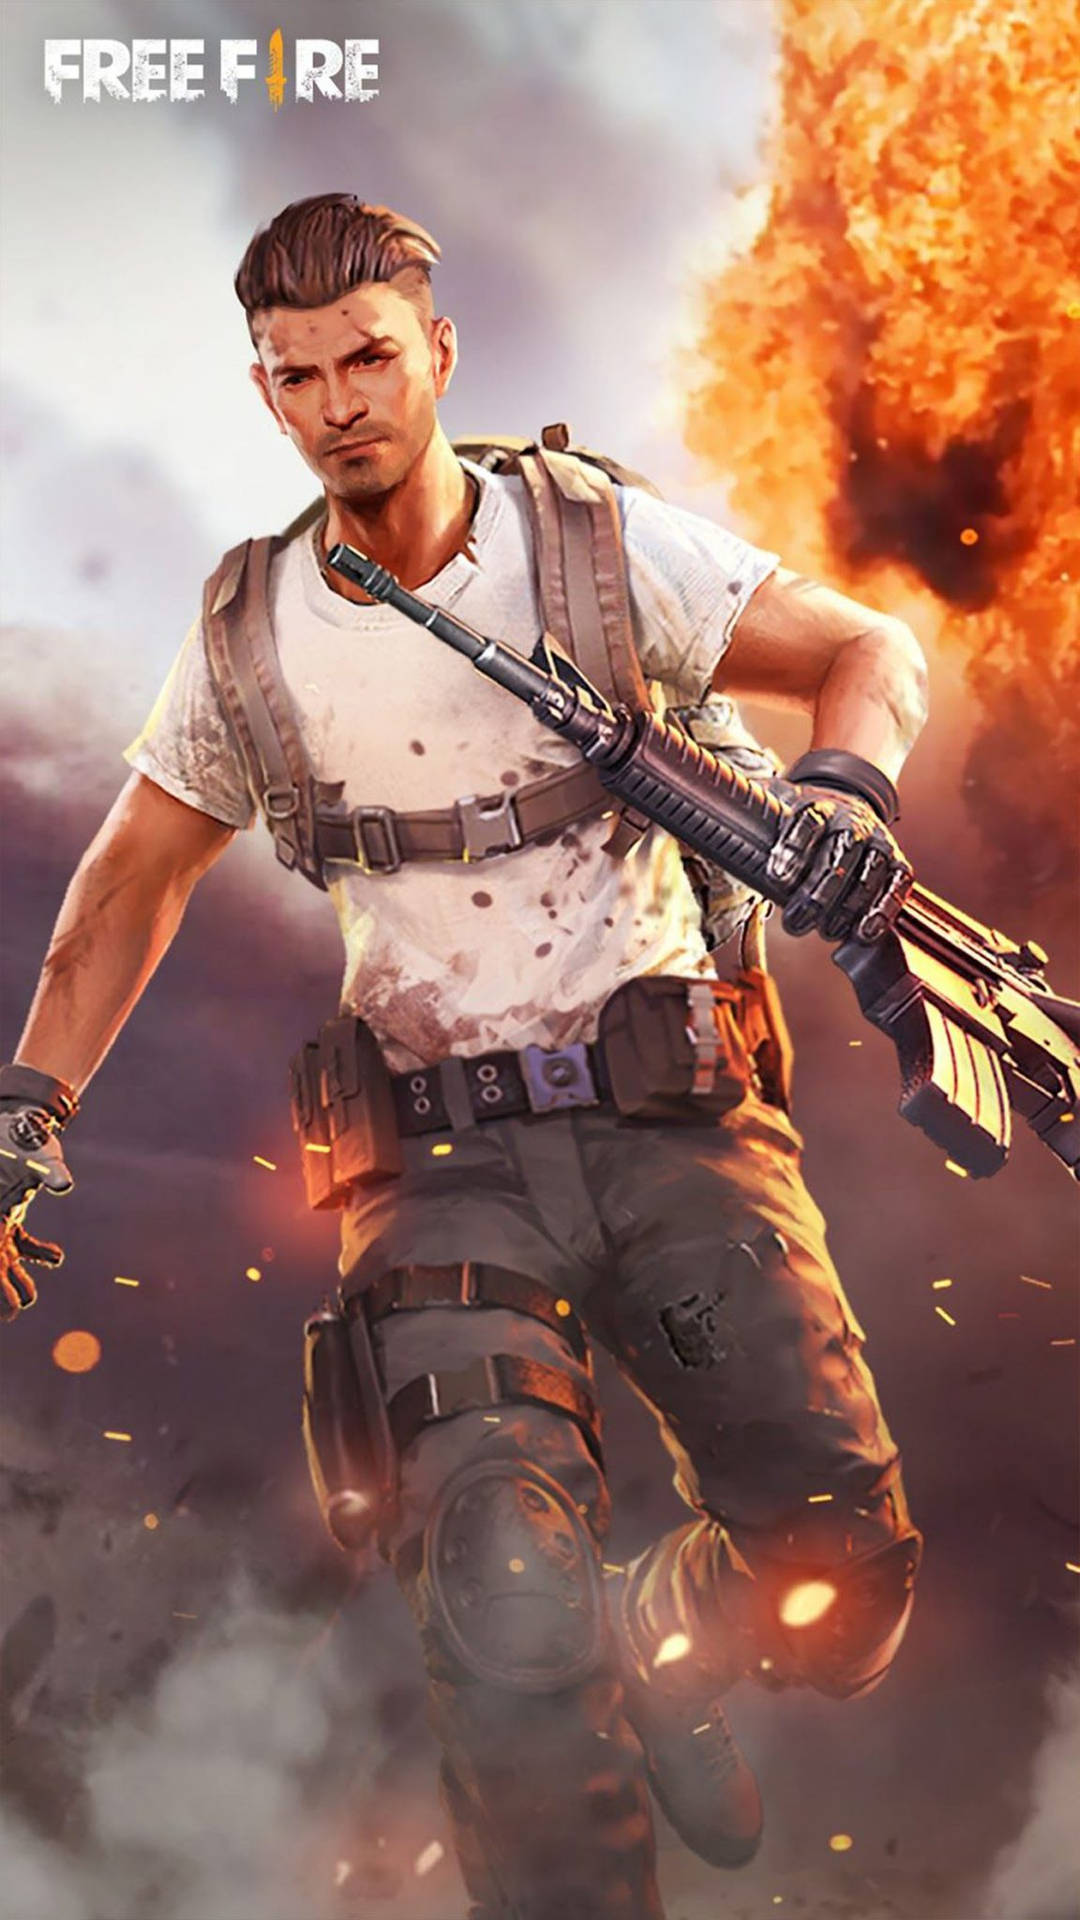 Free Fire Character On Battle Field Background